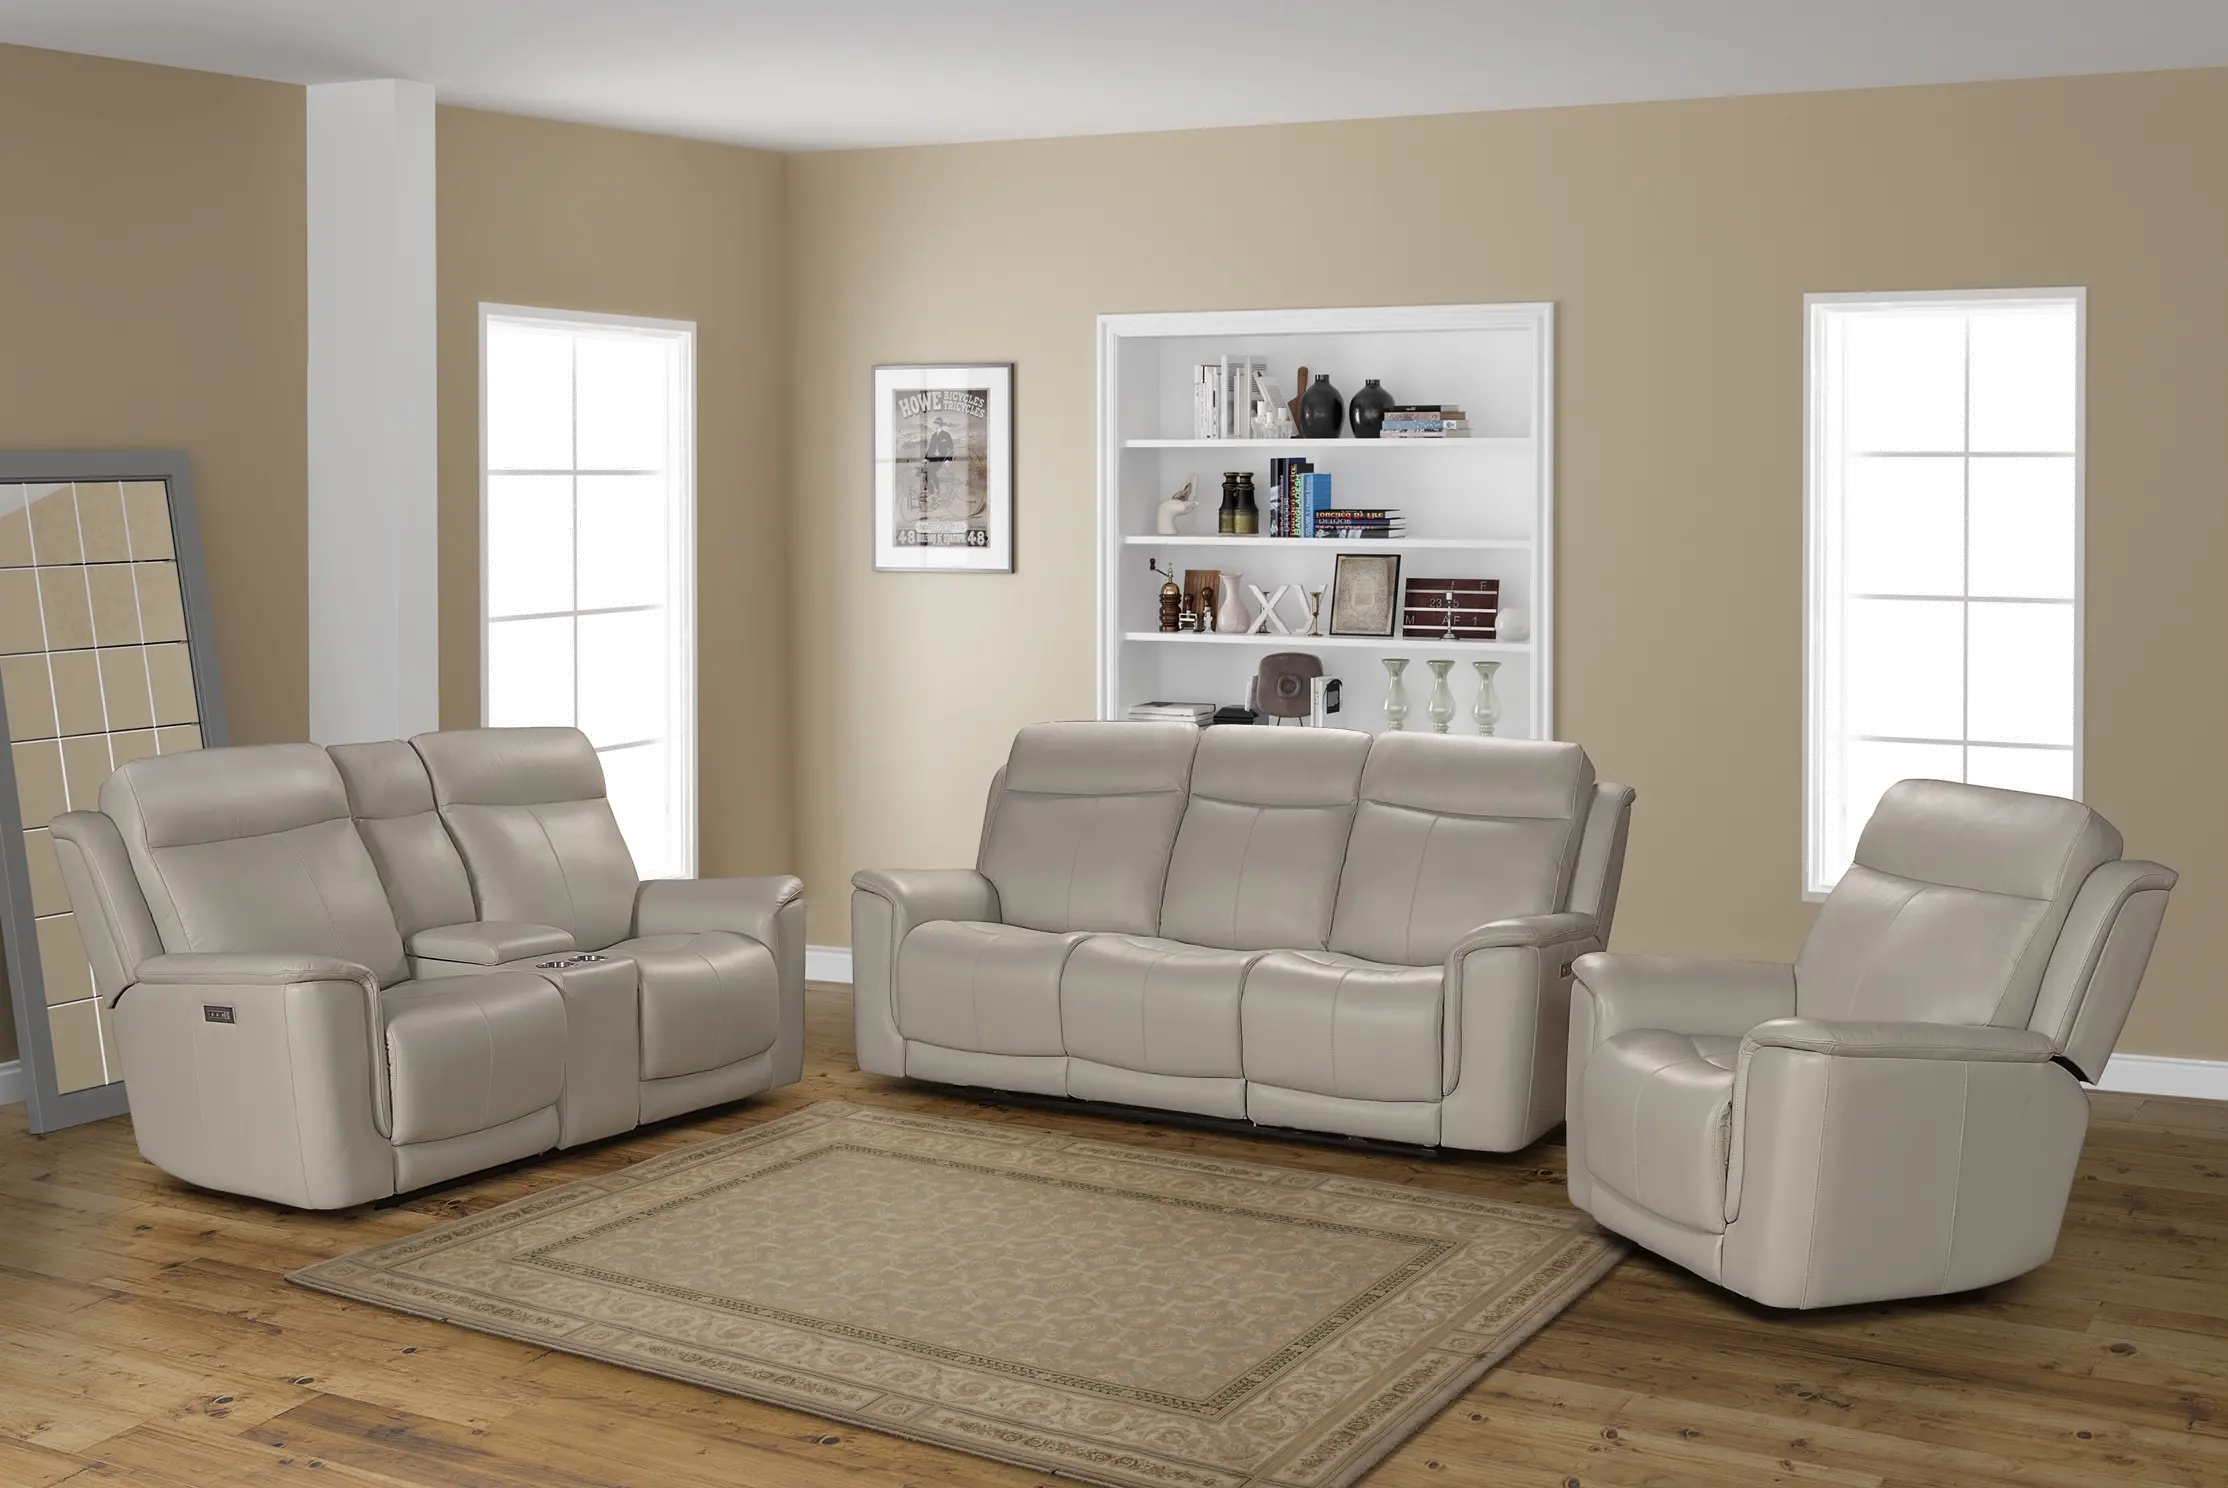 https://static.rcwilley.com/products/111889900/Burbank-Cream-Leather-Triple-Power-Reclining-Sofa-rcwilley-image1.webp